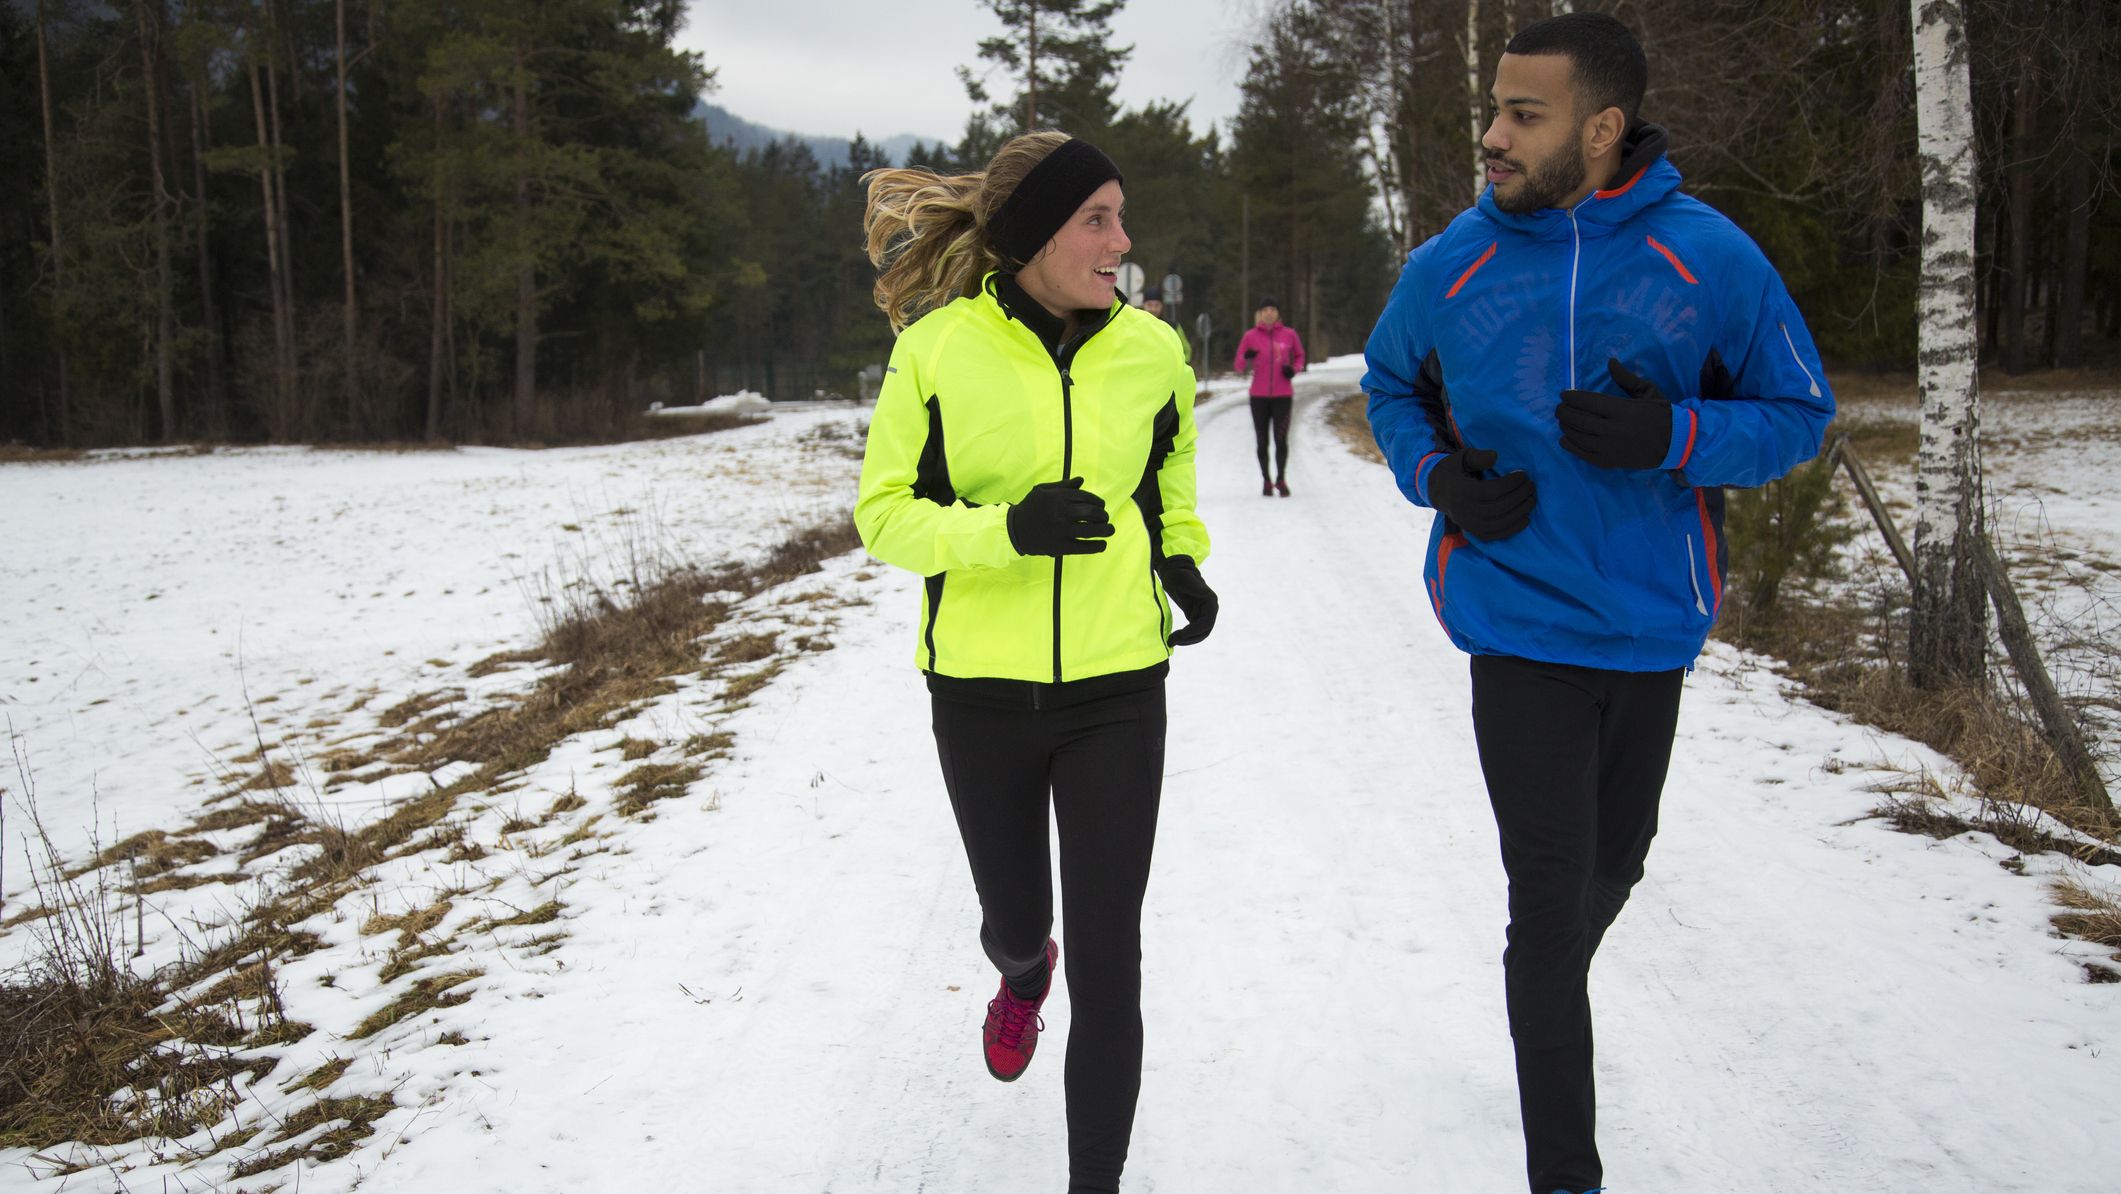 How to Dress for Winter Running - Advice for Cold Weather Runs